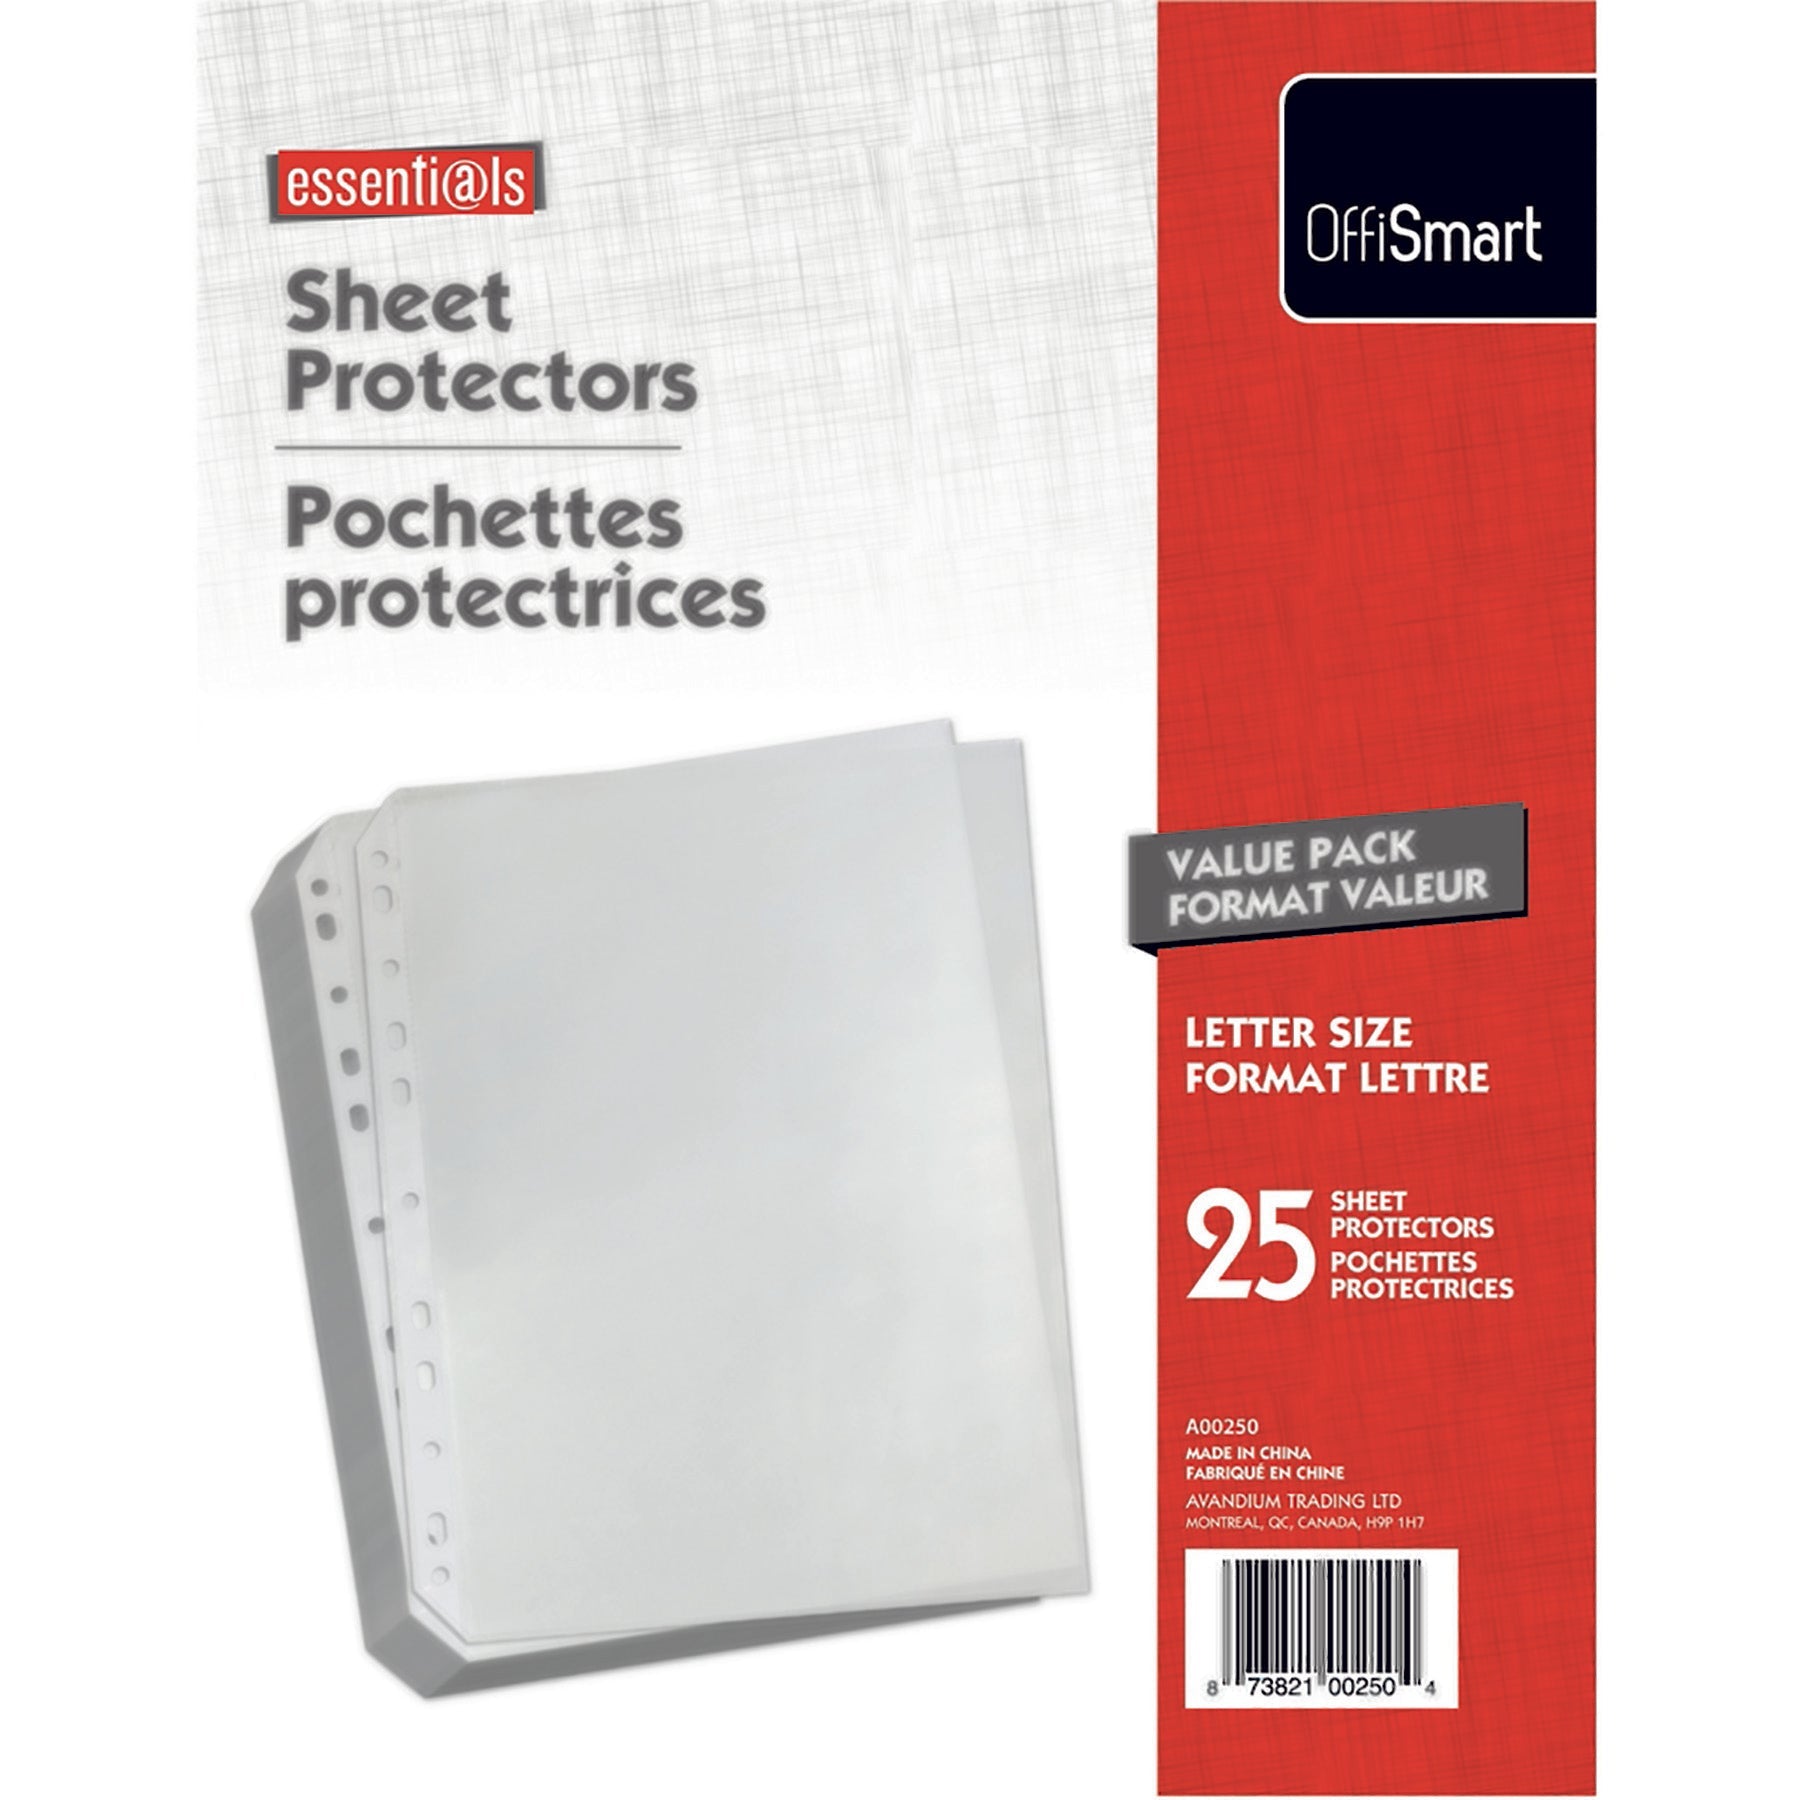 Offismart 25 Sheet Protectors Clear Plastic 11.25x8.5in